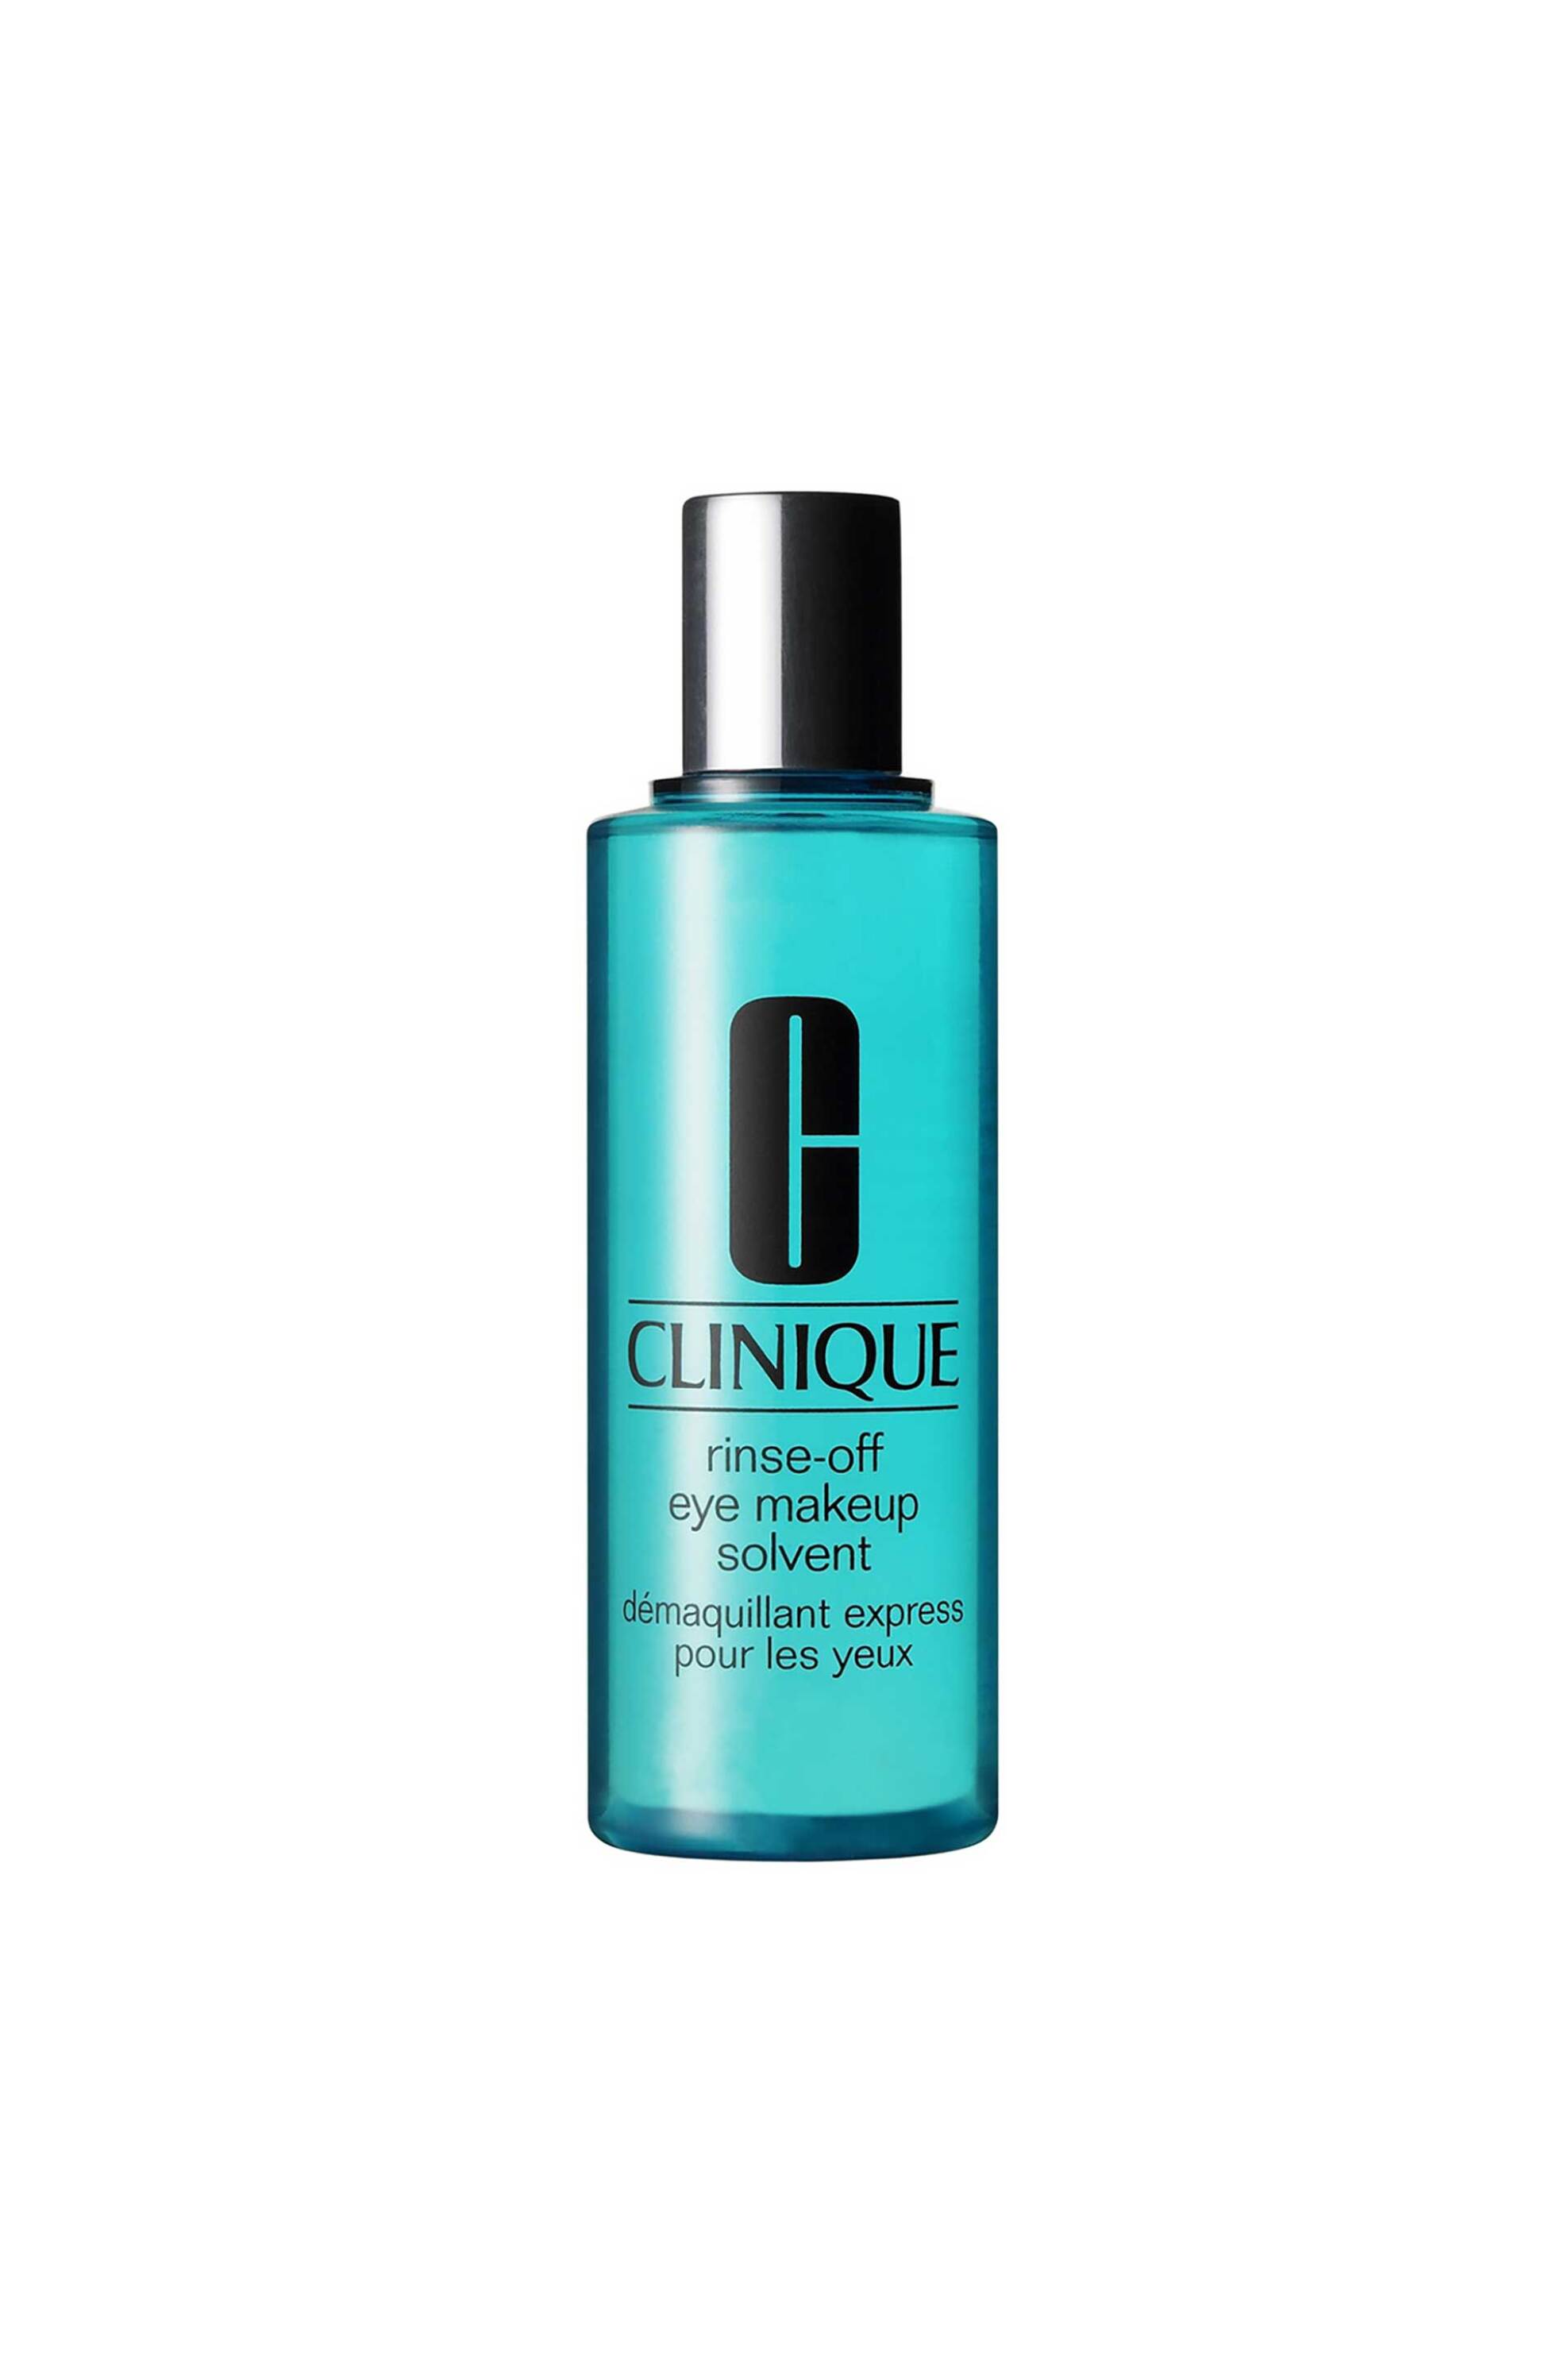 Clinique Rinse-Off Eye Makeup Solvent 125 ml - 6147010000 980207500043